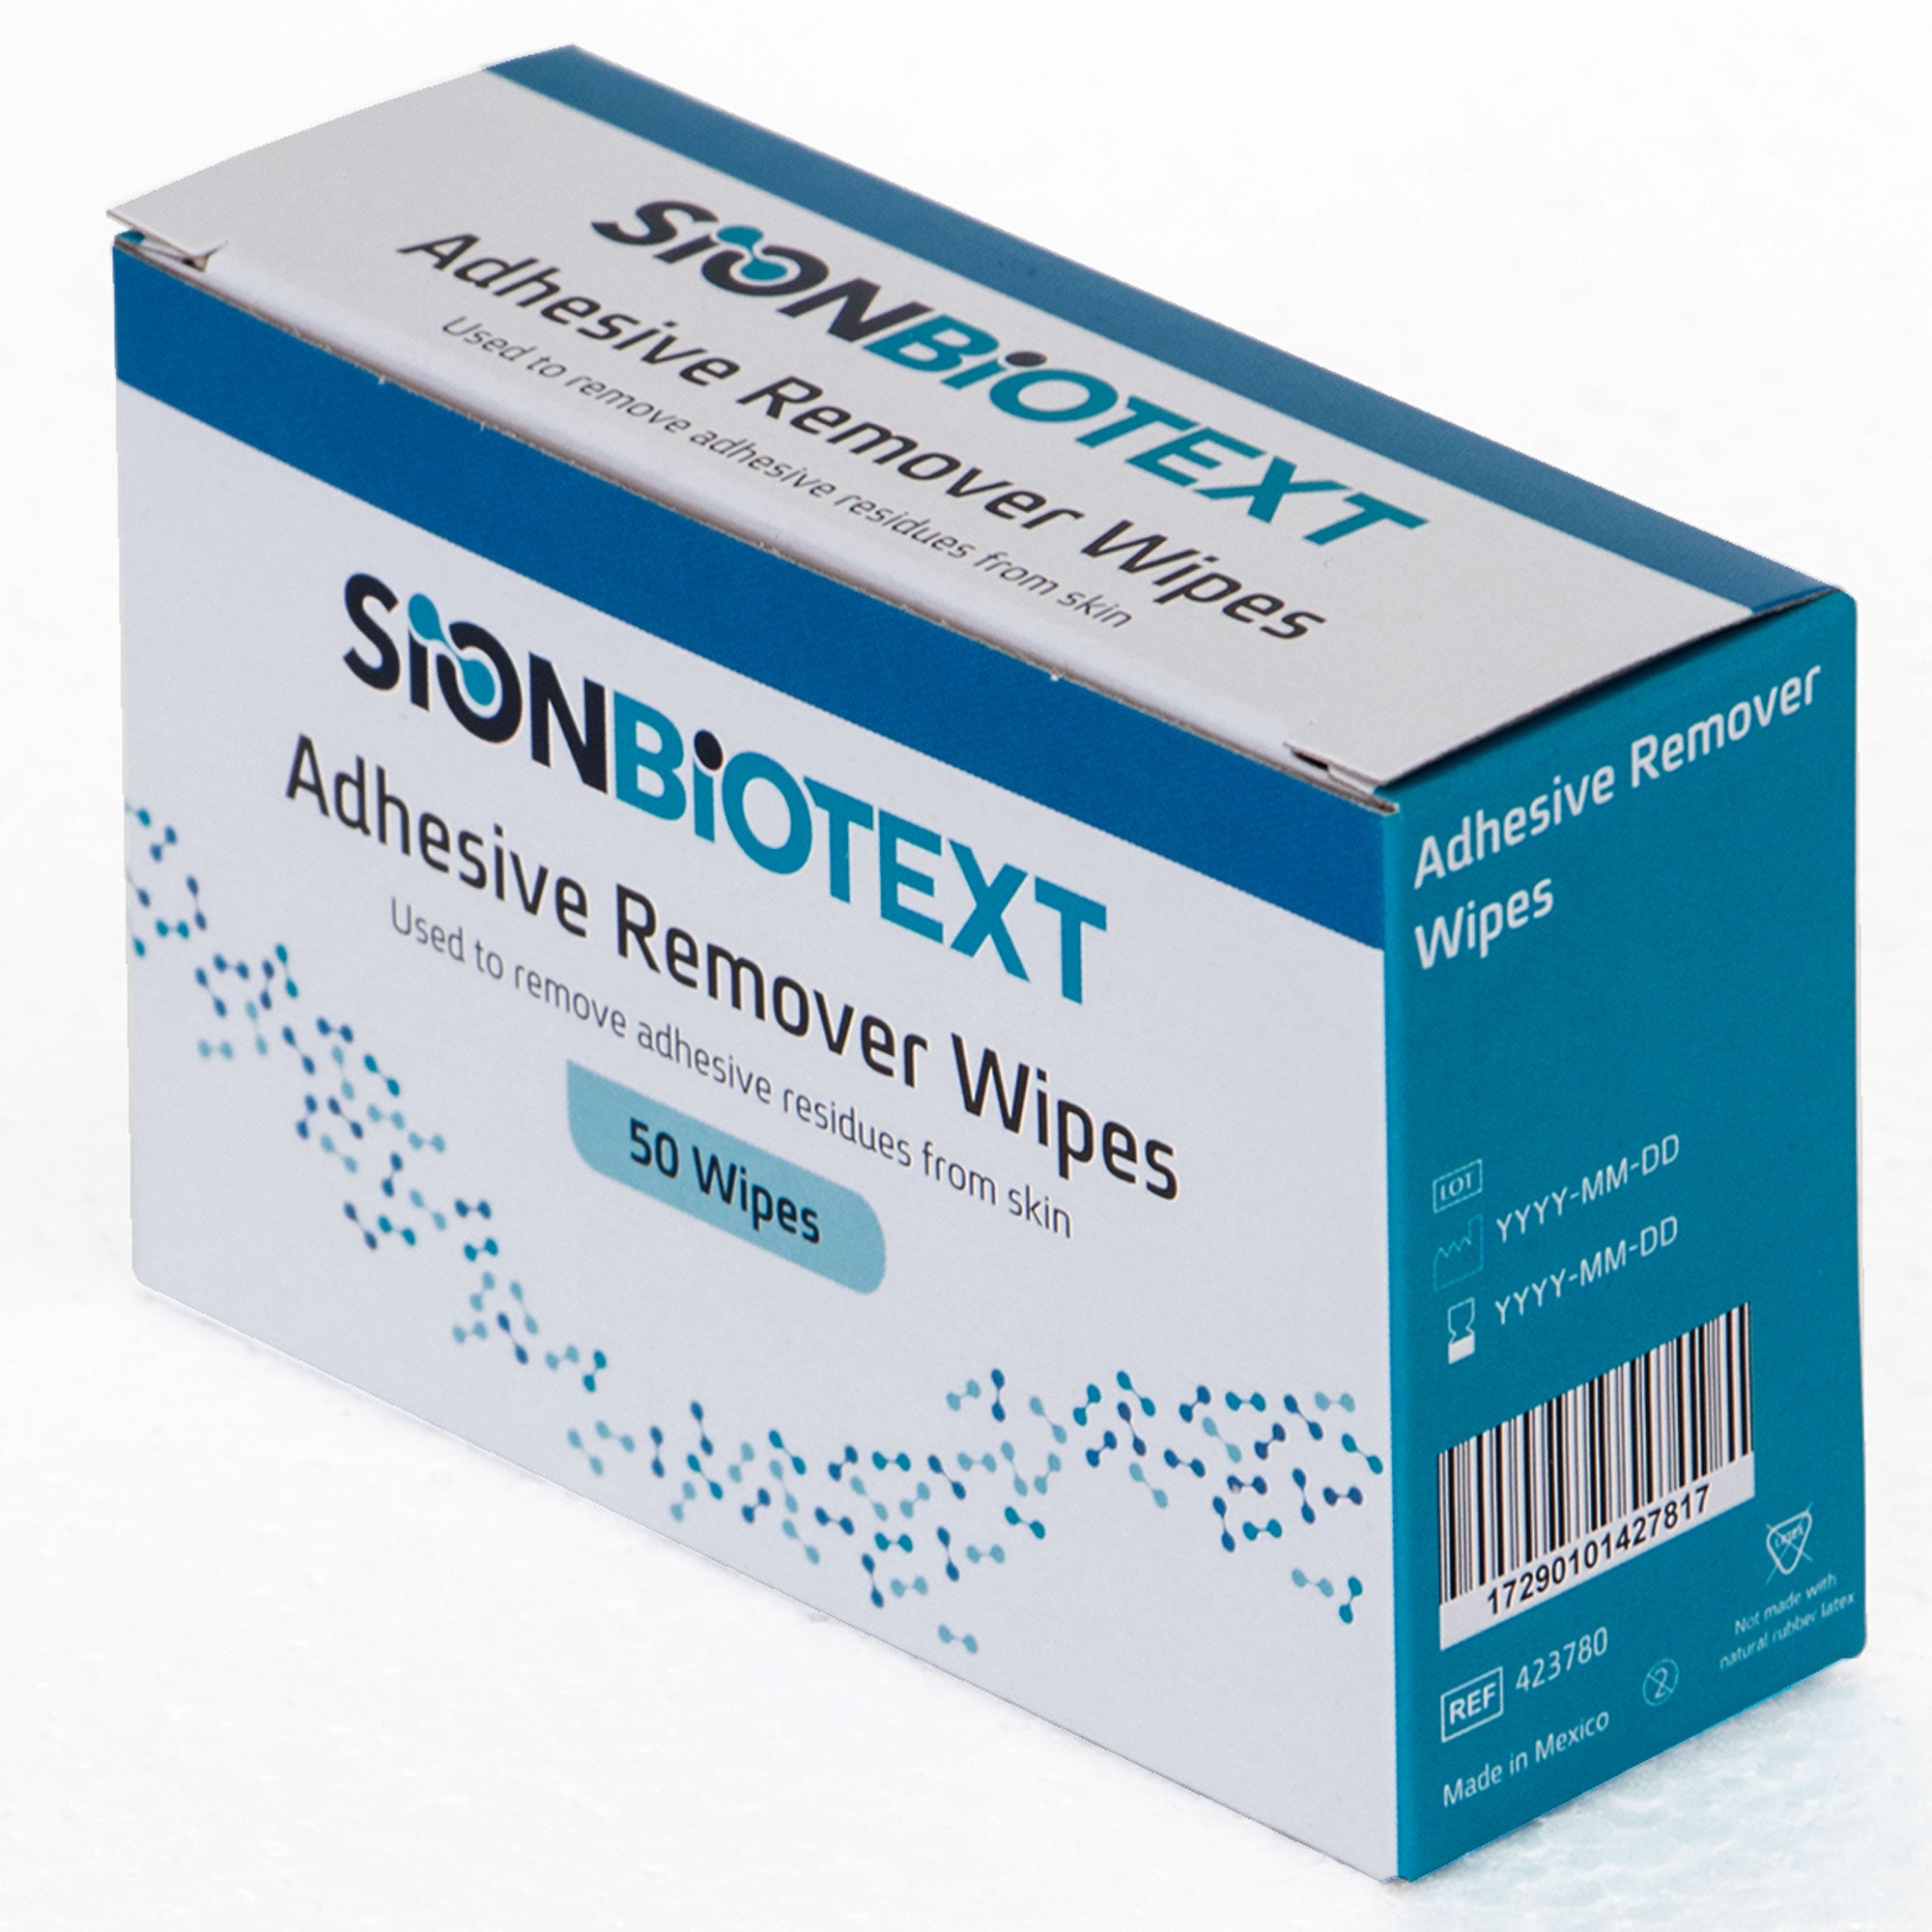 Sion Biotext Adhesive Remover Wipes, 50 ct - Replaces AllKare Item